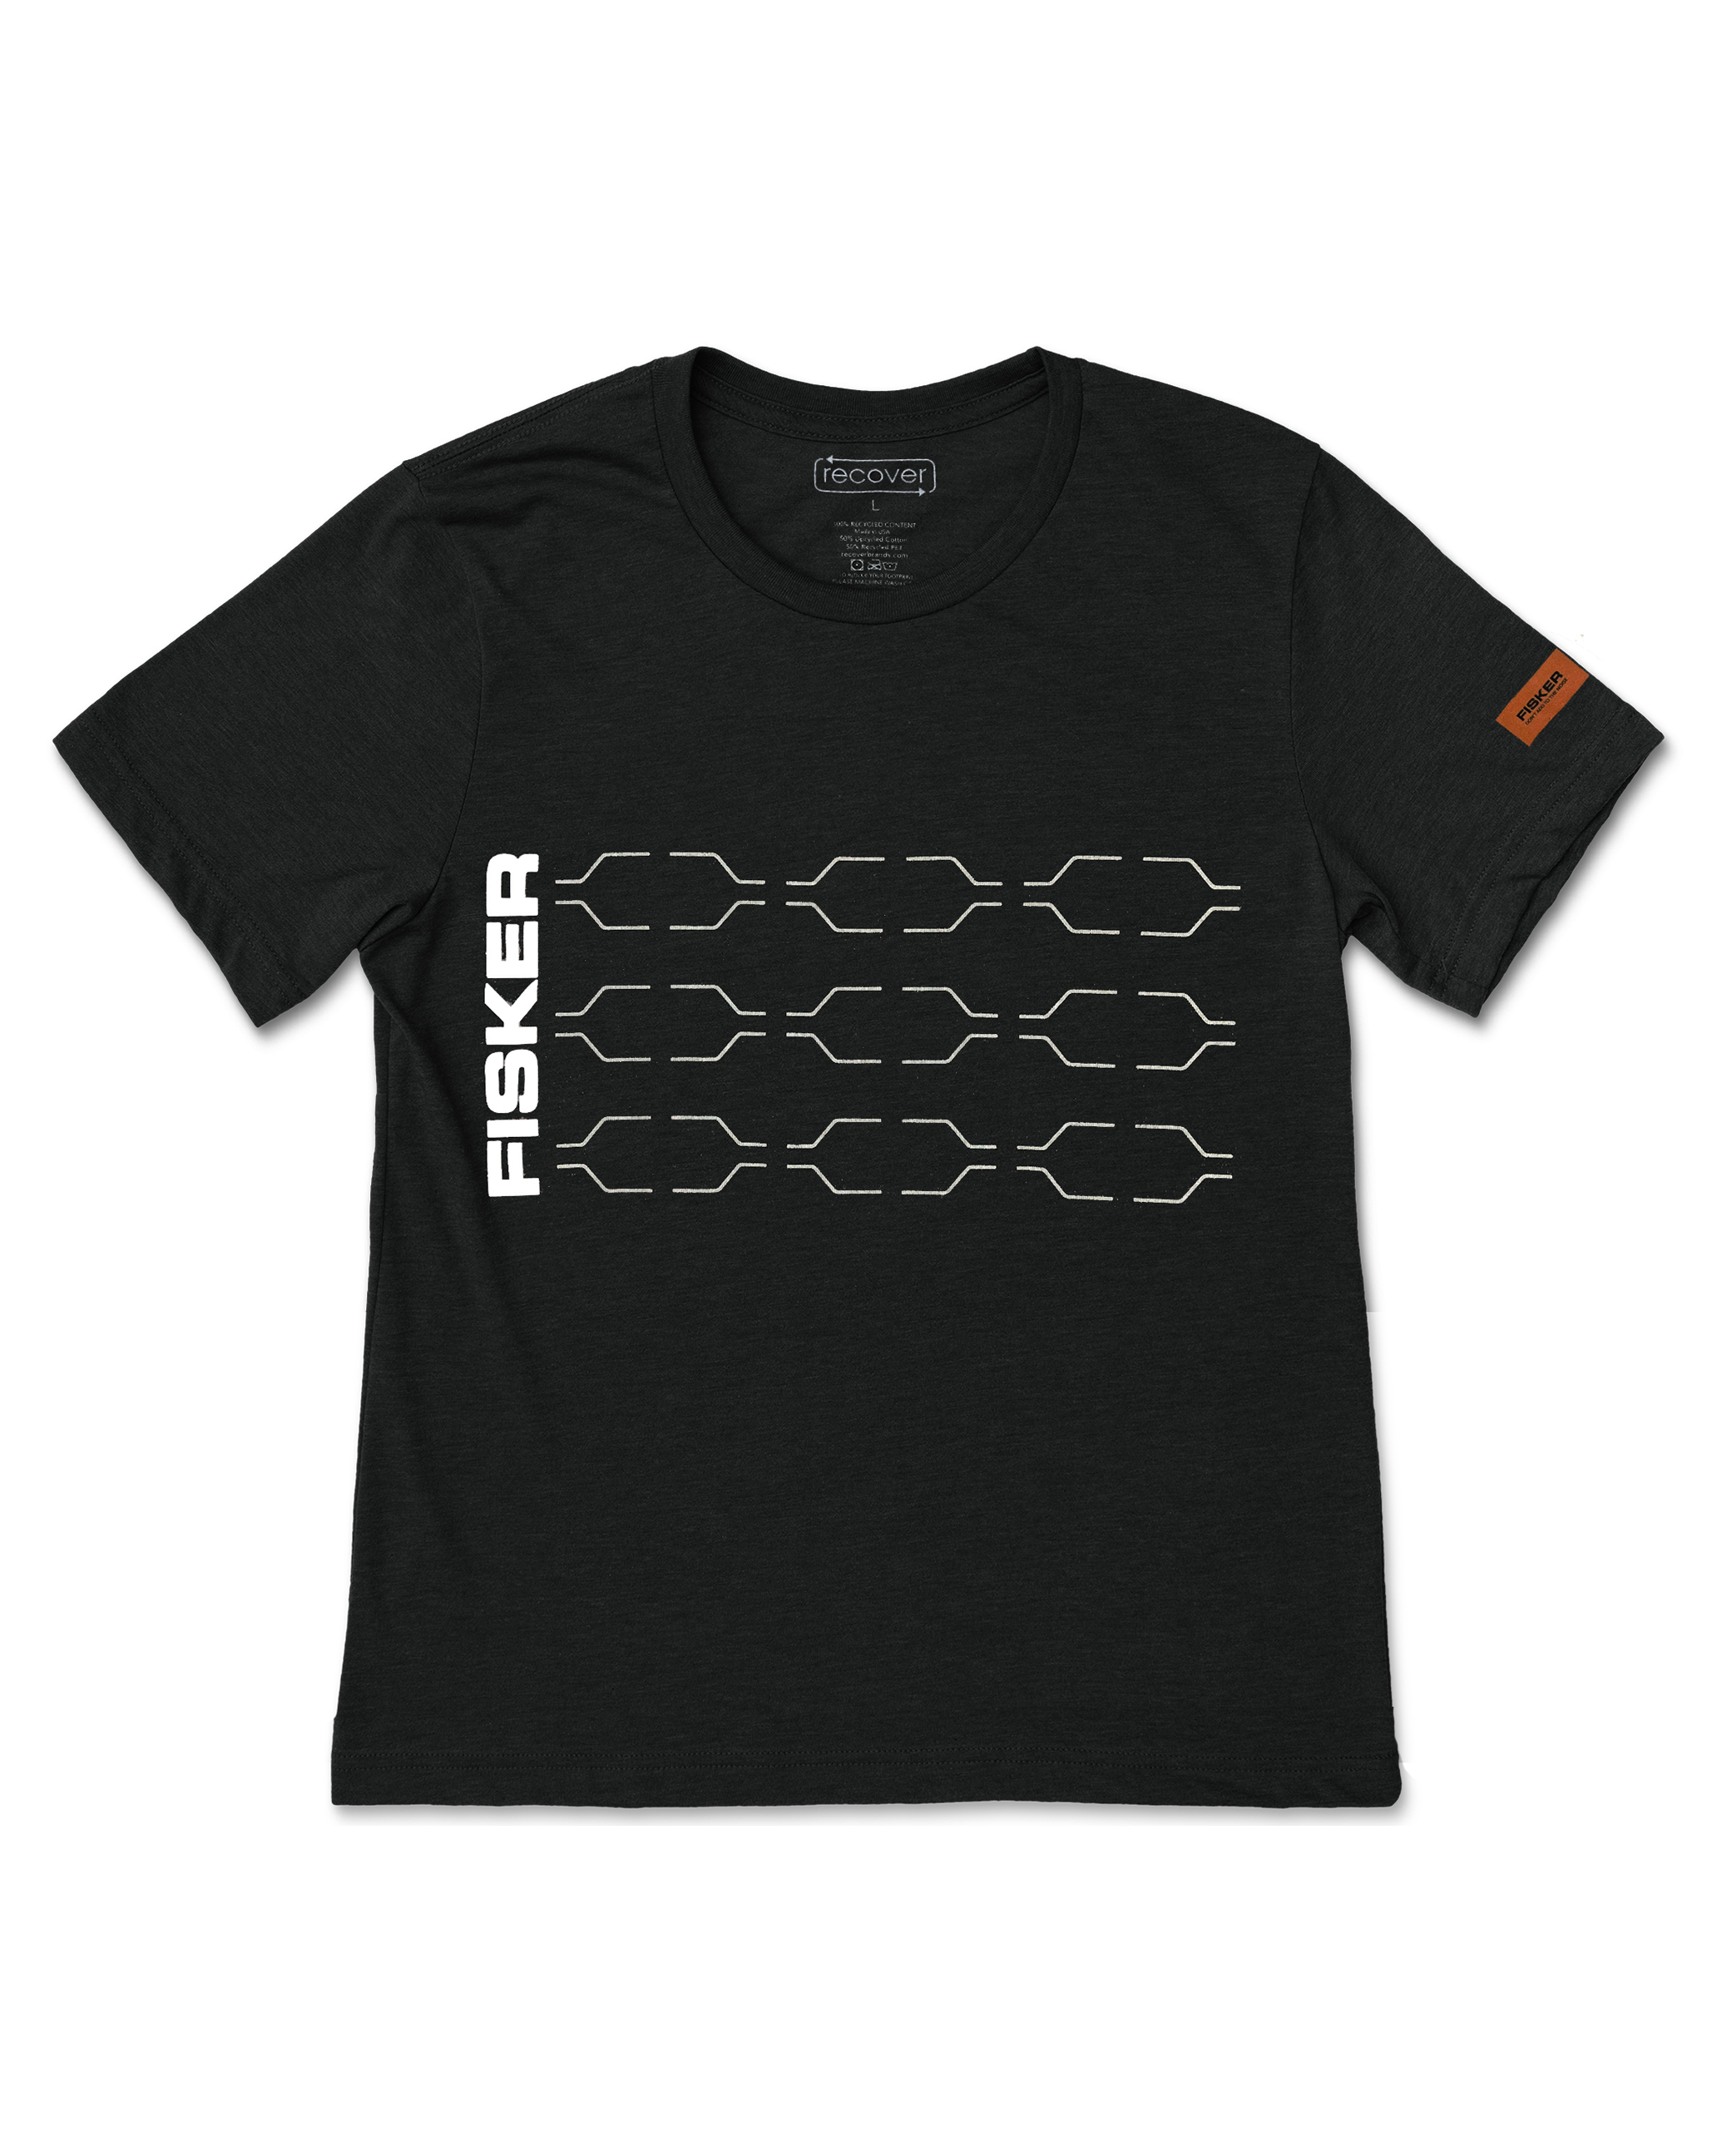 First Edition Solar T-shirt image number 0